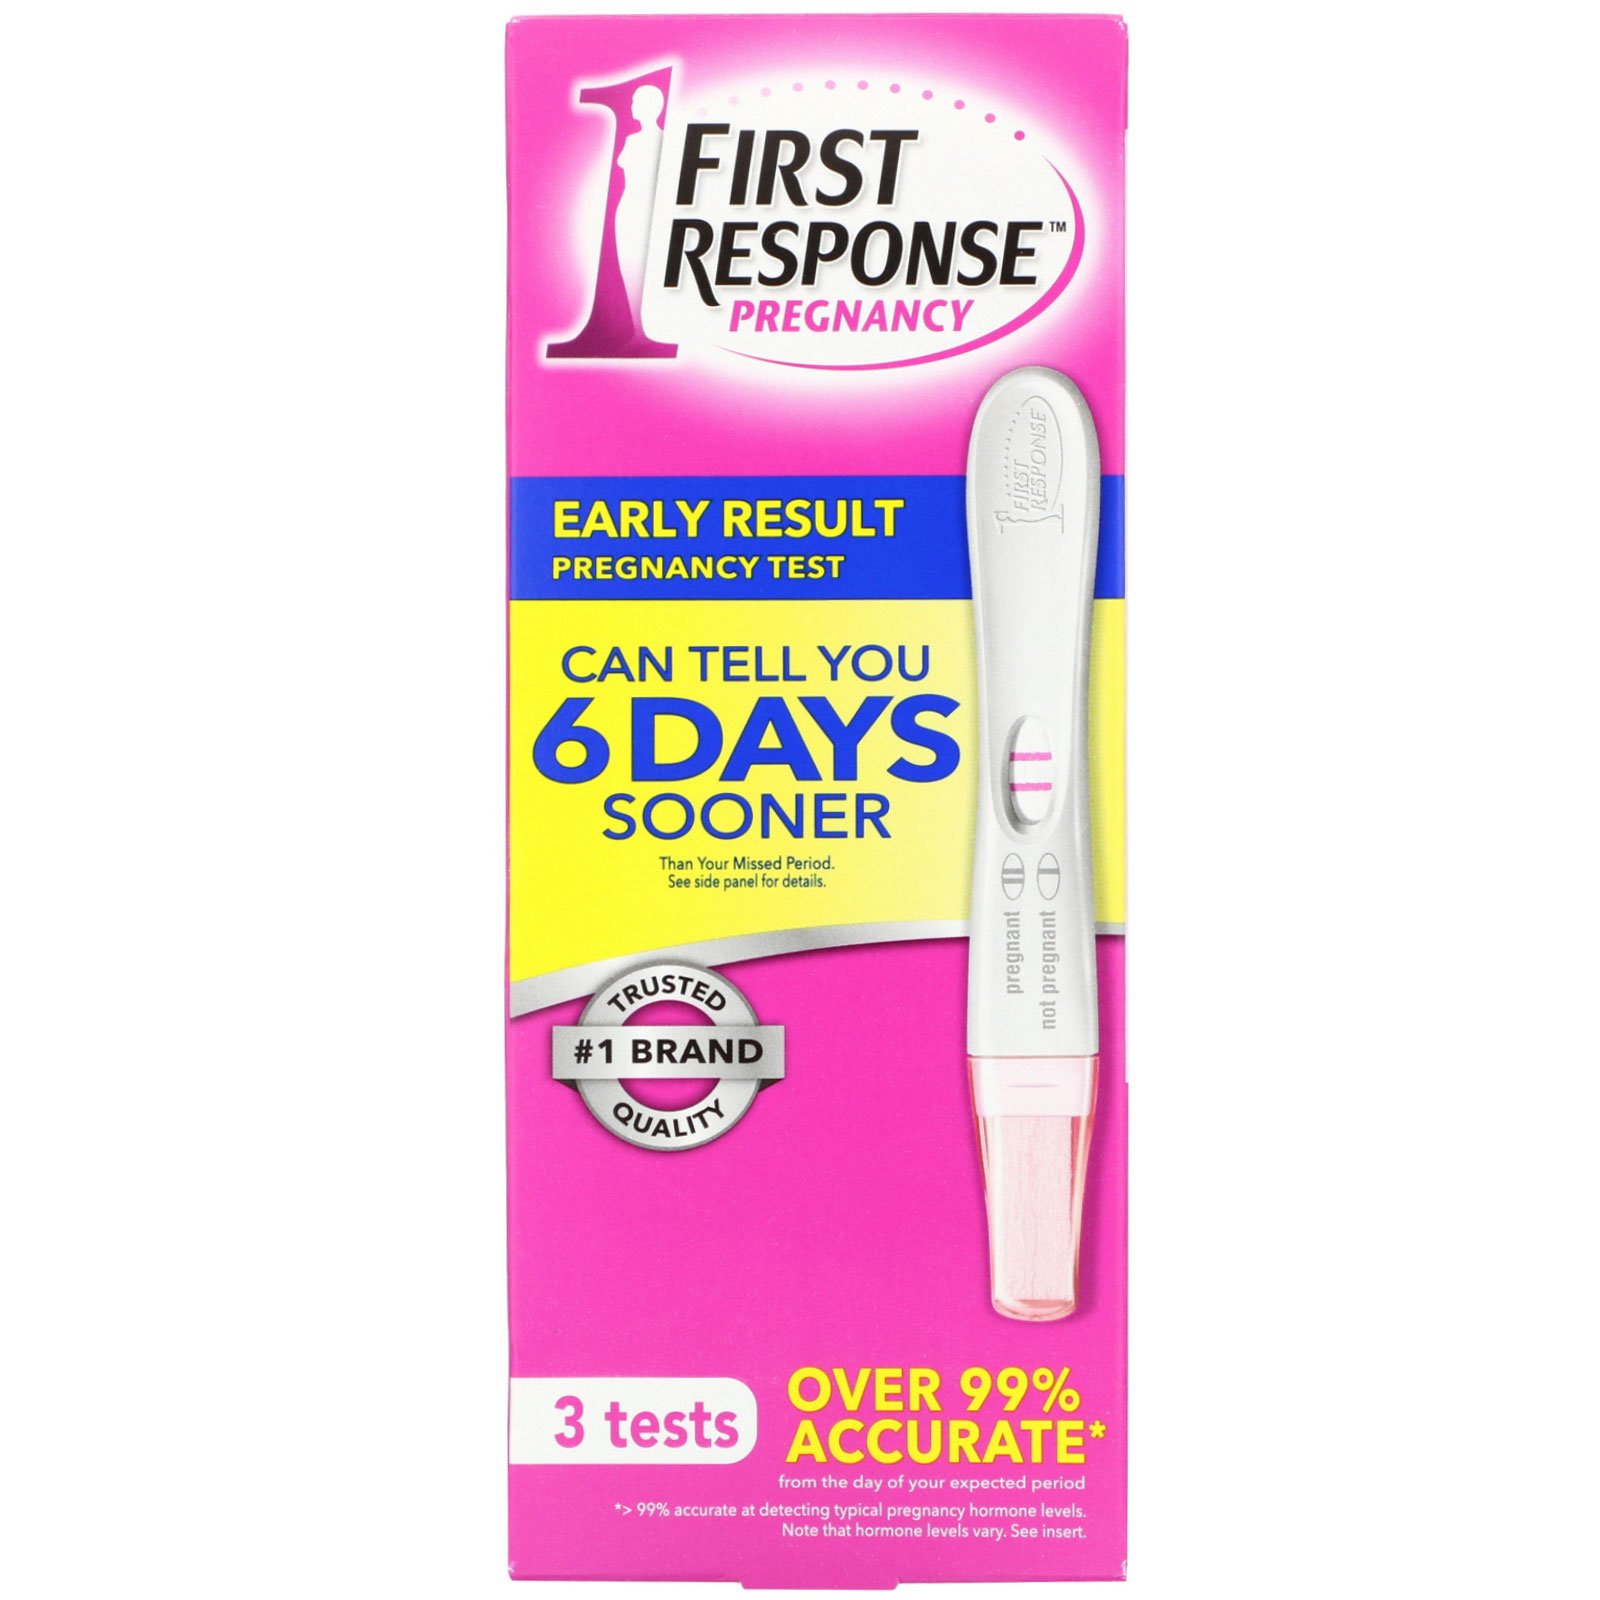 First Response, Early Result Pregnancy Test, 3 Tests iHerb